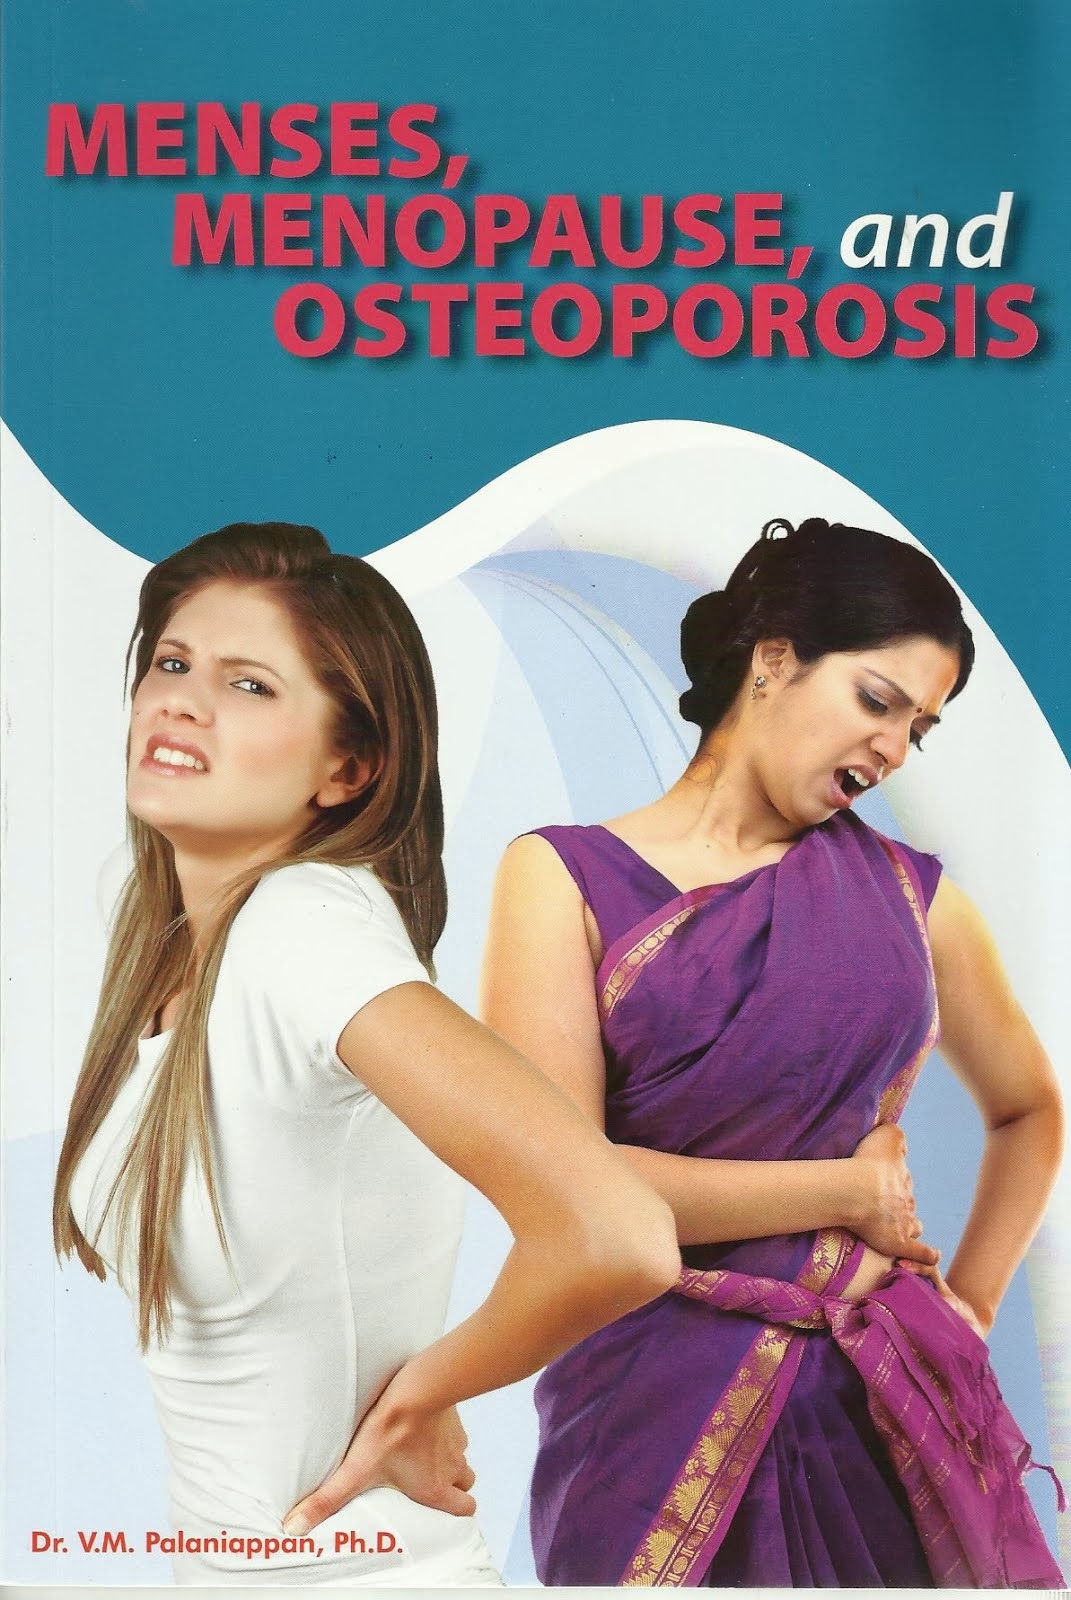 MENSES, MENOPAUSE, AND OSTEOPOROSIS